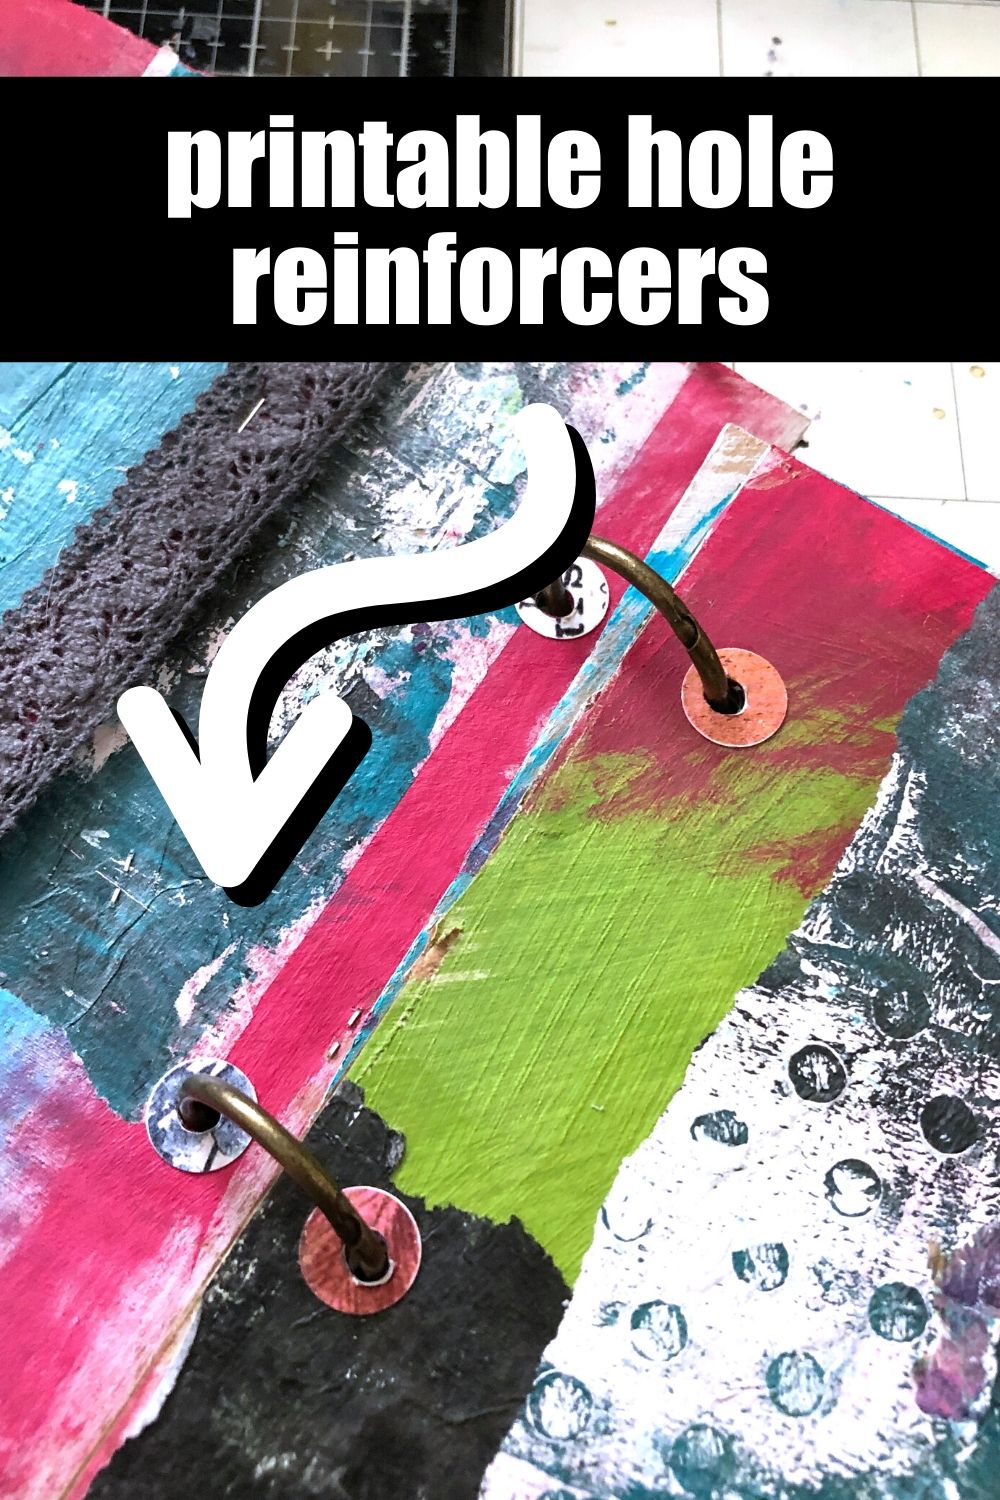 free-printable-hole-reinforcers-for-junk-journals-and-binders-artsy